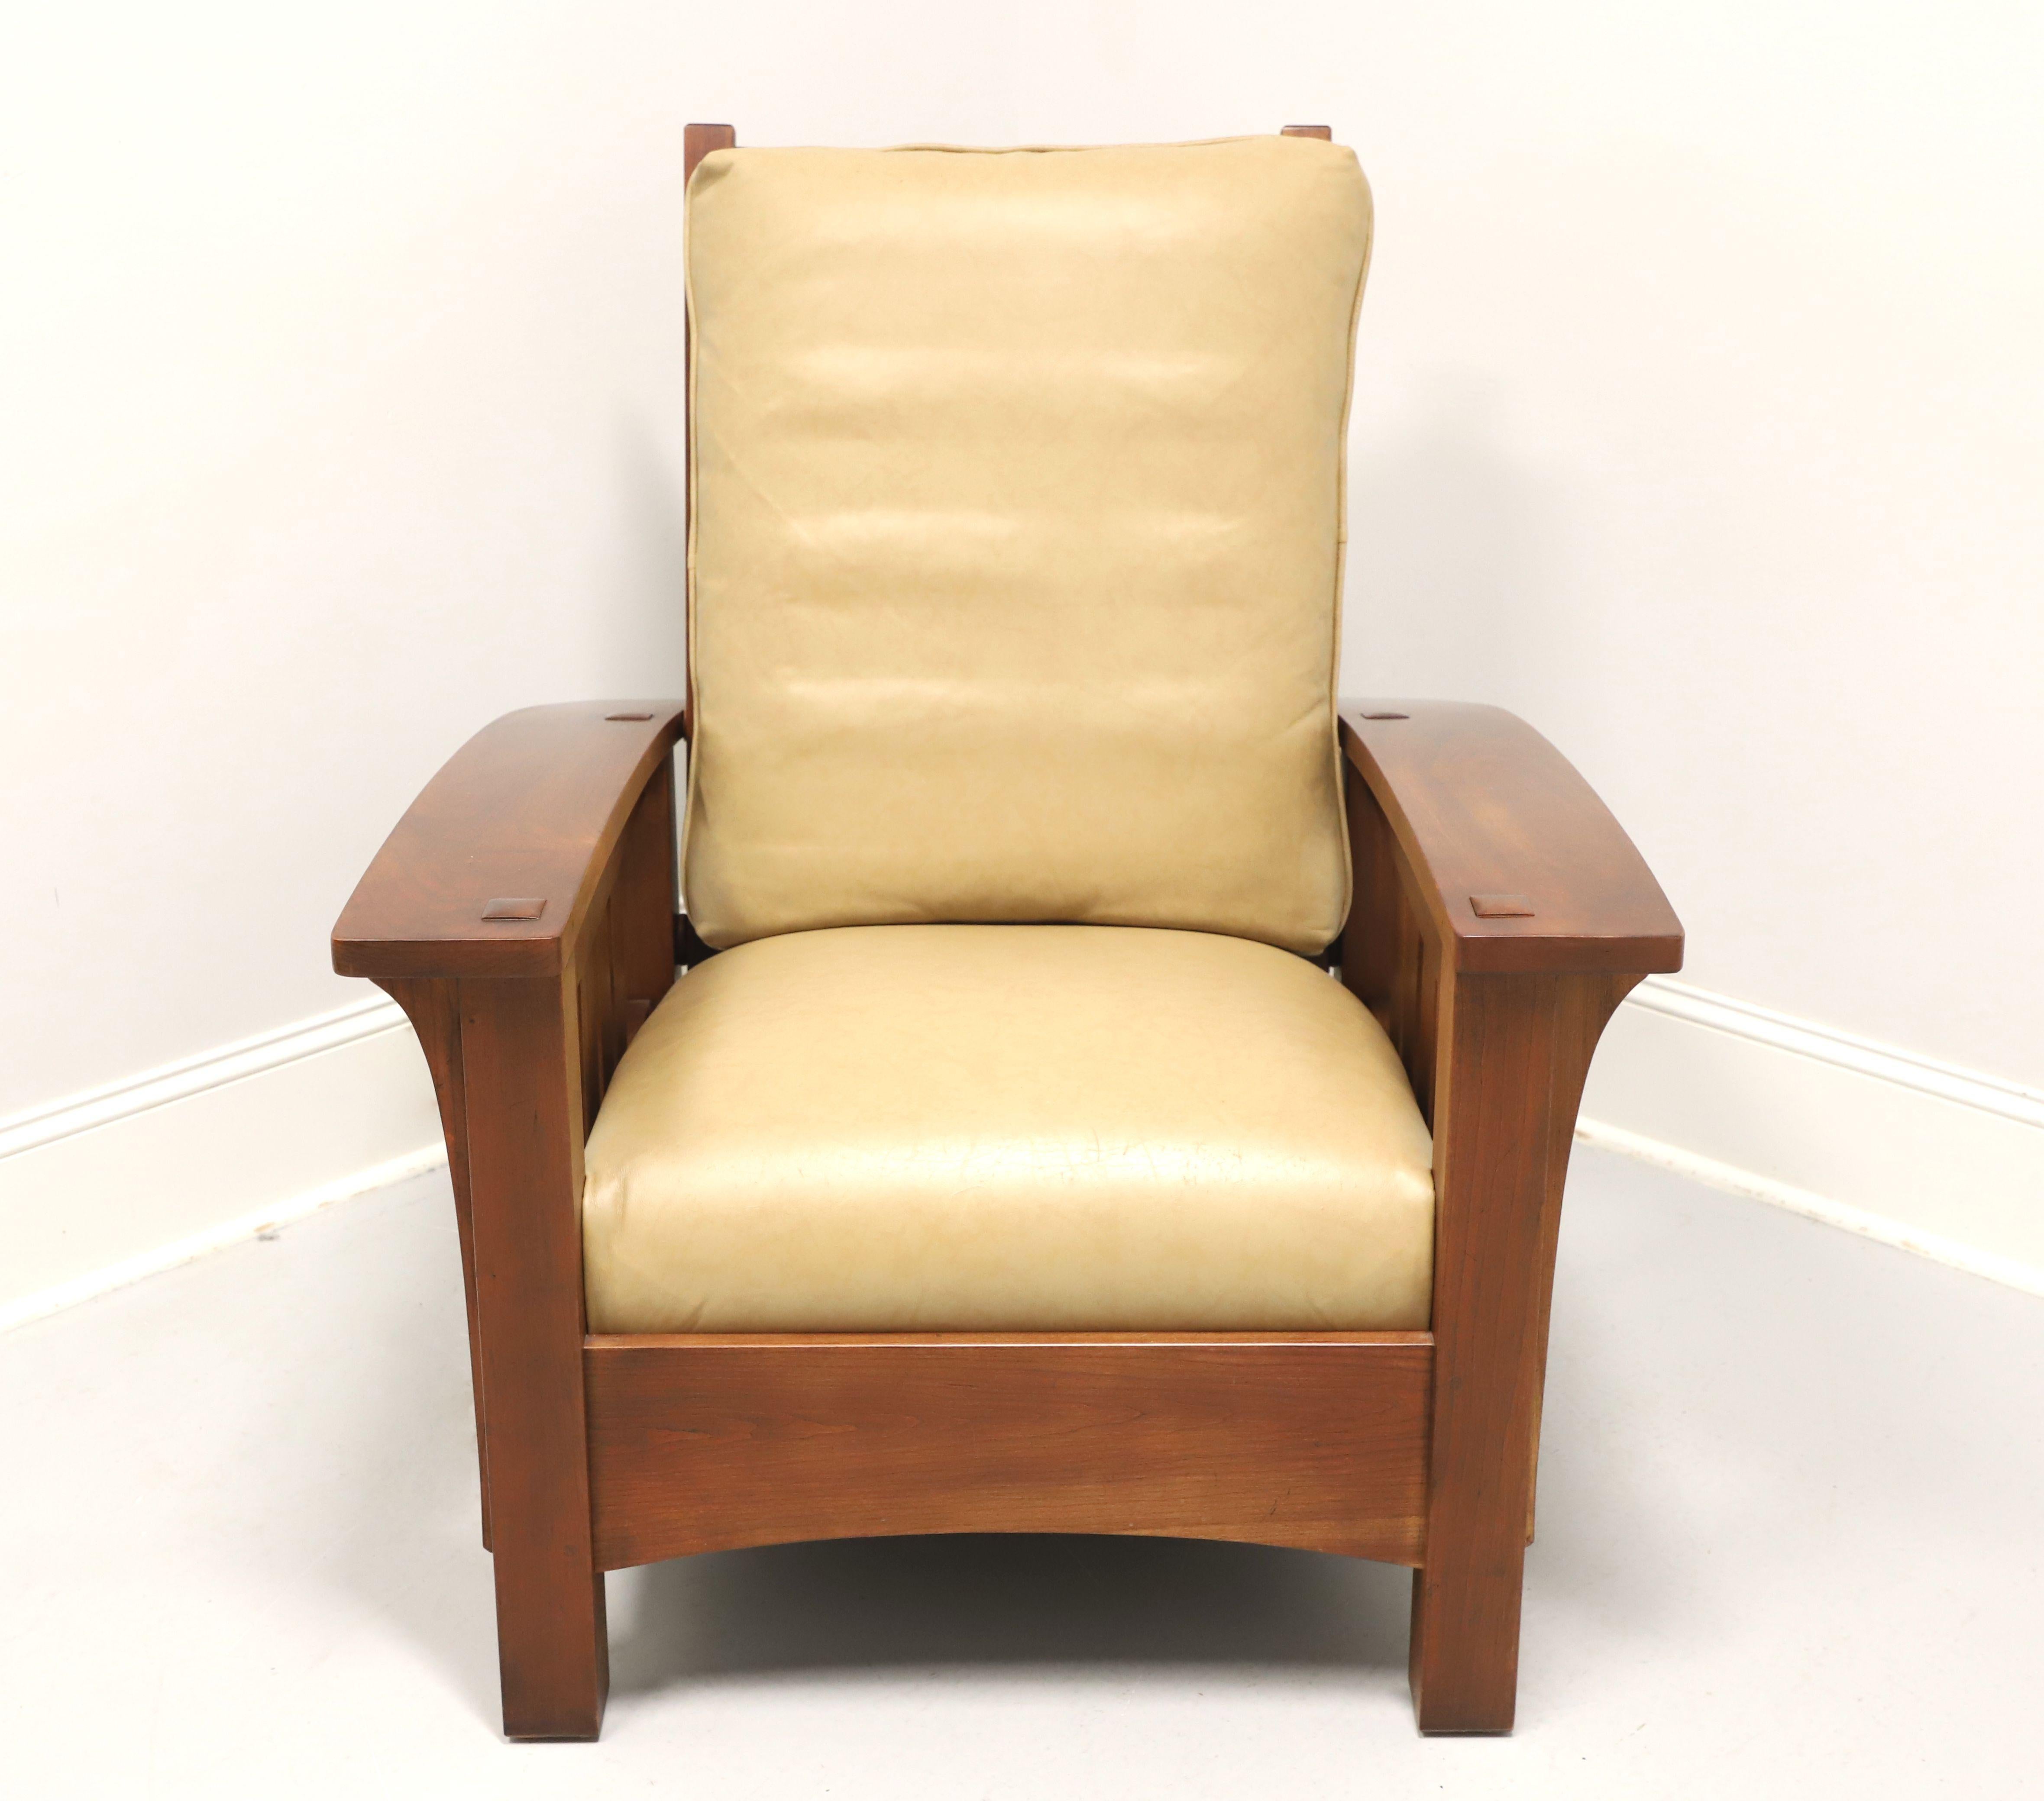 An Arts & Crafts Mission style reclining armchair by Stickley Furniture, their Morris. Solid cherry wood, adjustable reclining slatted high back, bowed arms supported by elongated corbels, slatted sides, and square straight legs. Features tan color